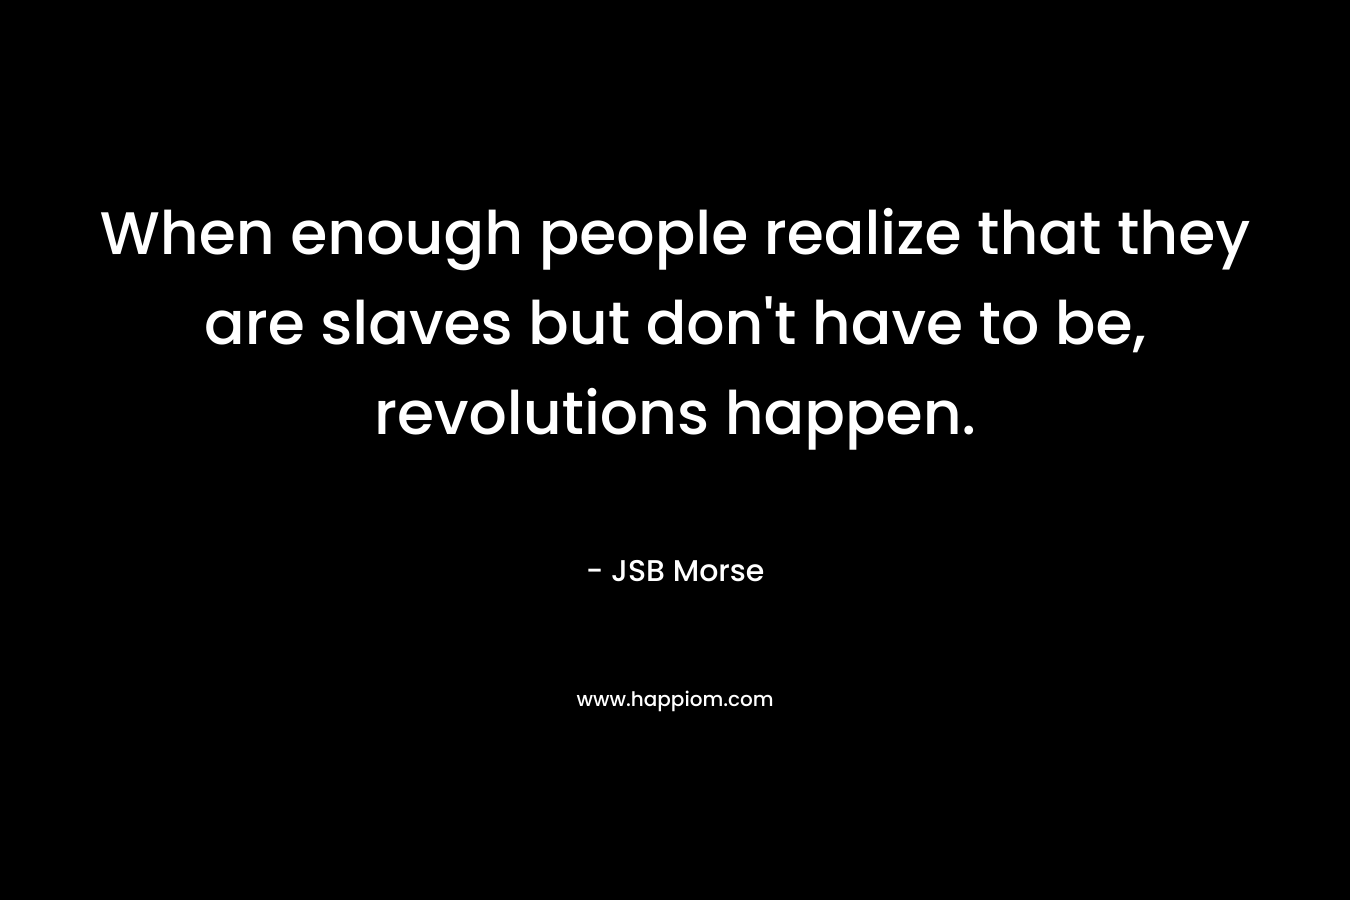 When enough people realize that they are slaves but don’t have to be, revolutions happen. – JSB Morse